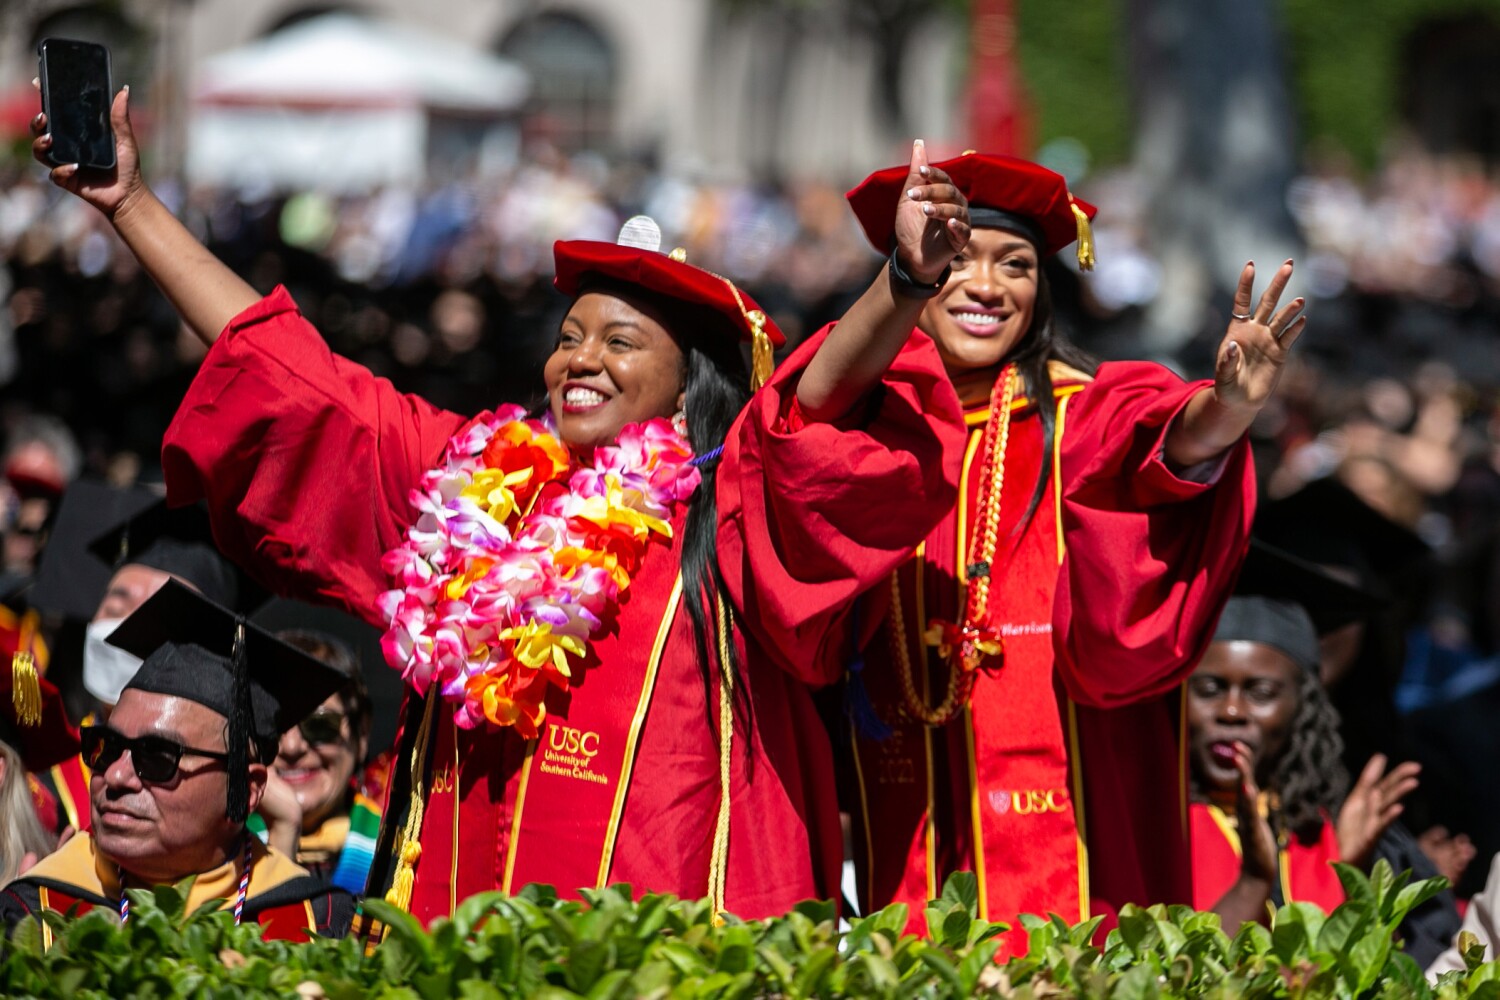 USC's 139th commencement ceremony